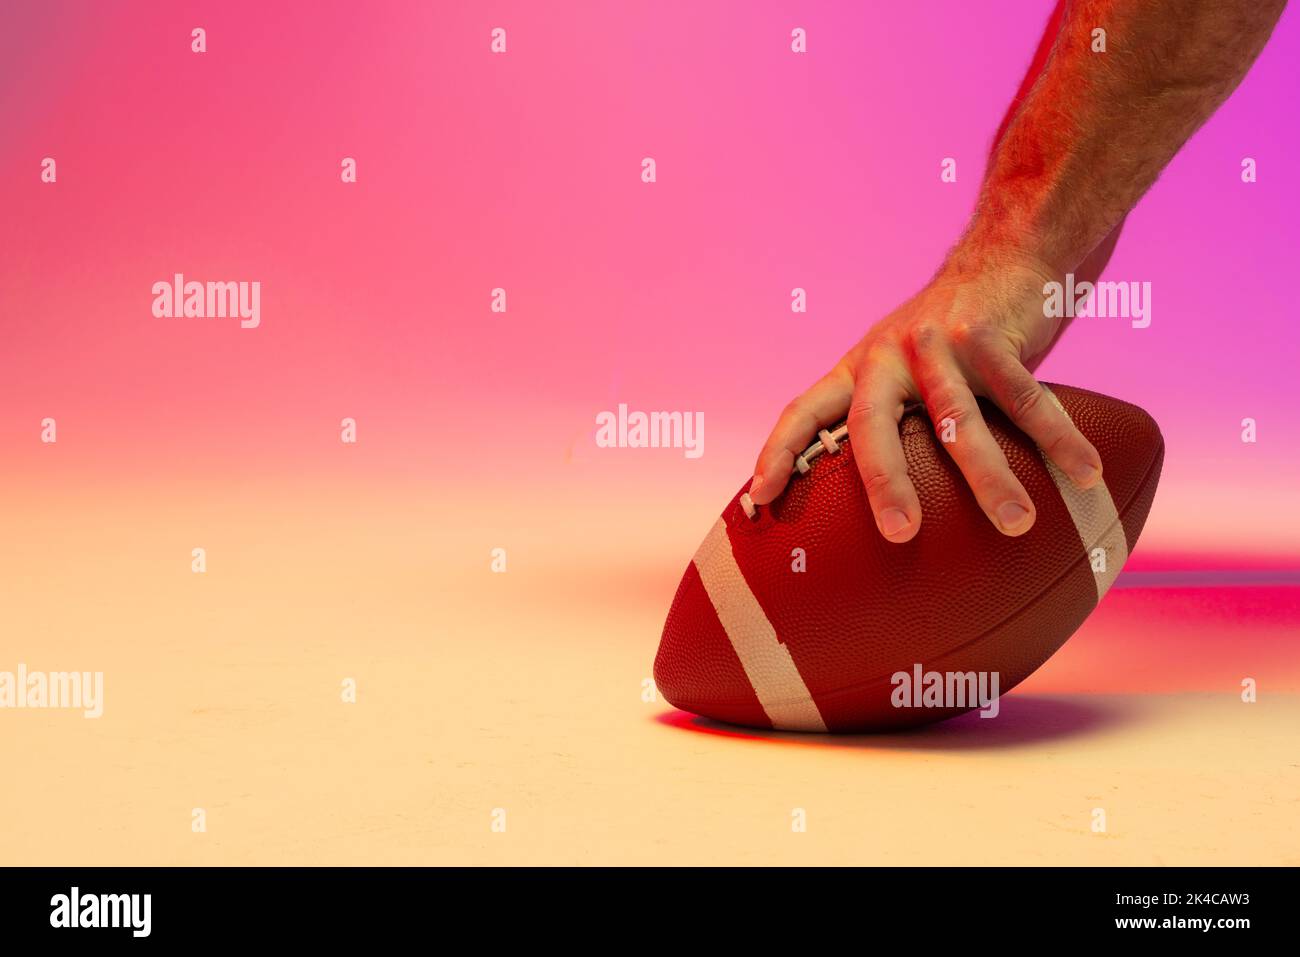 Hand of caucasian male american football player holding ball with neon pink lighting Stock Photo